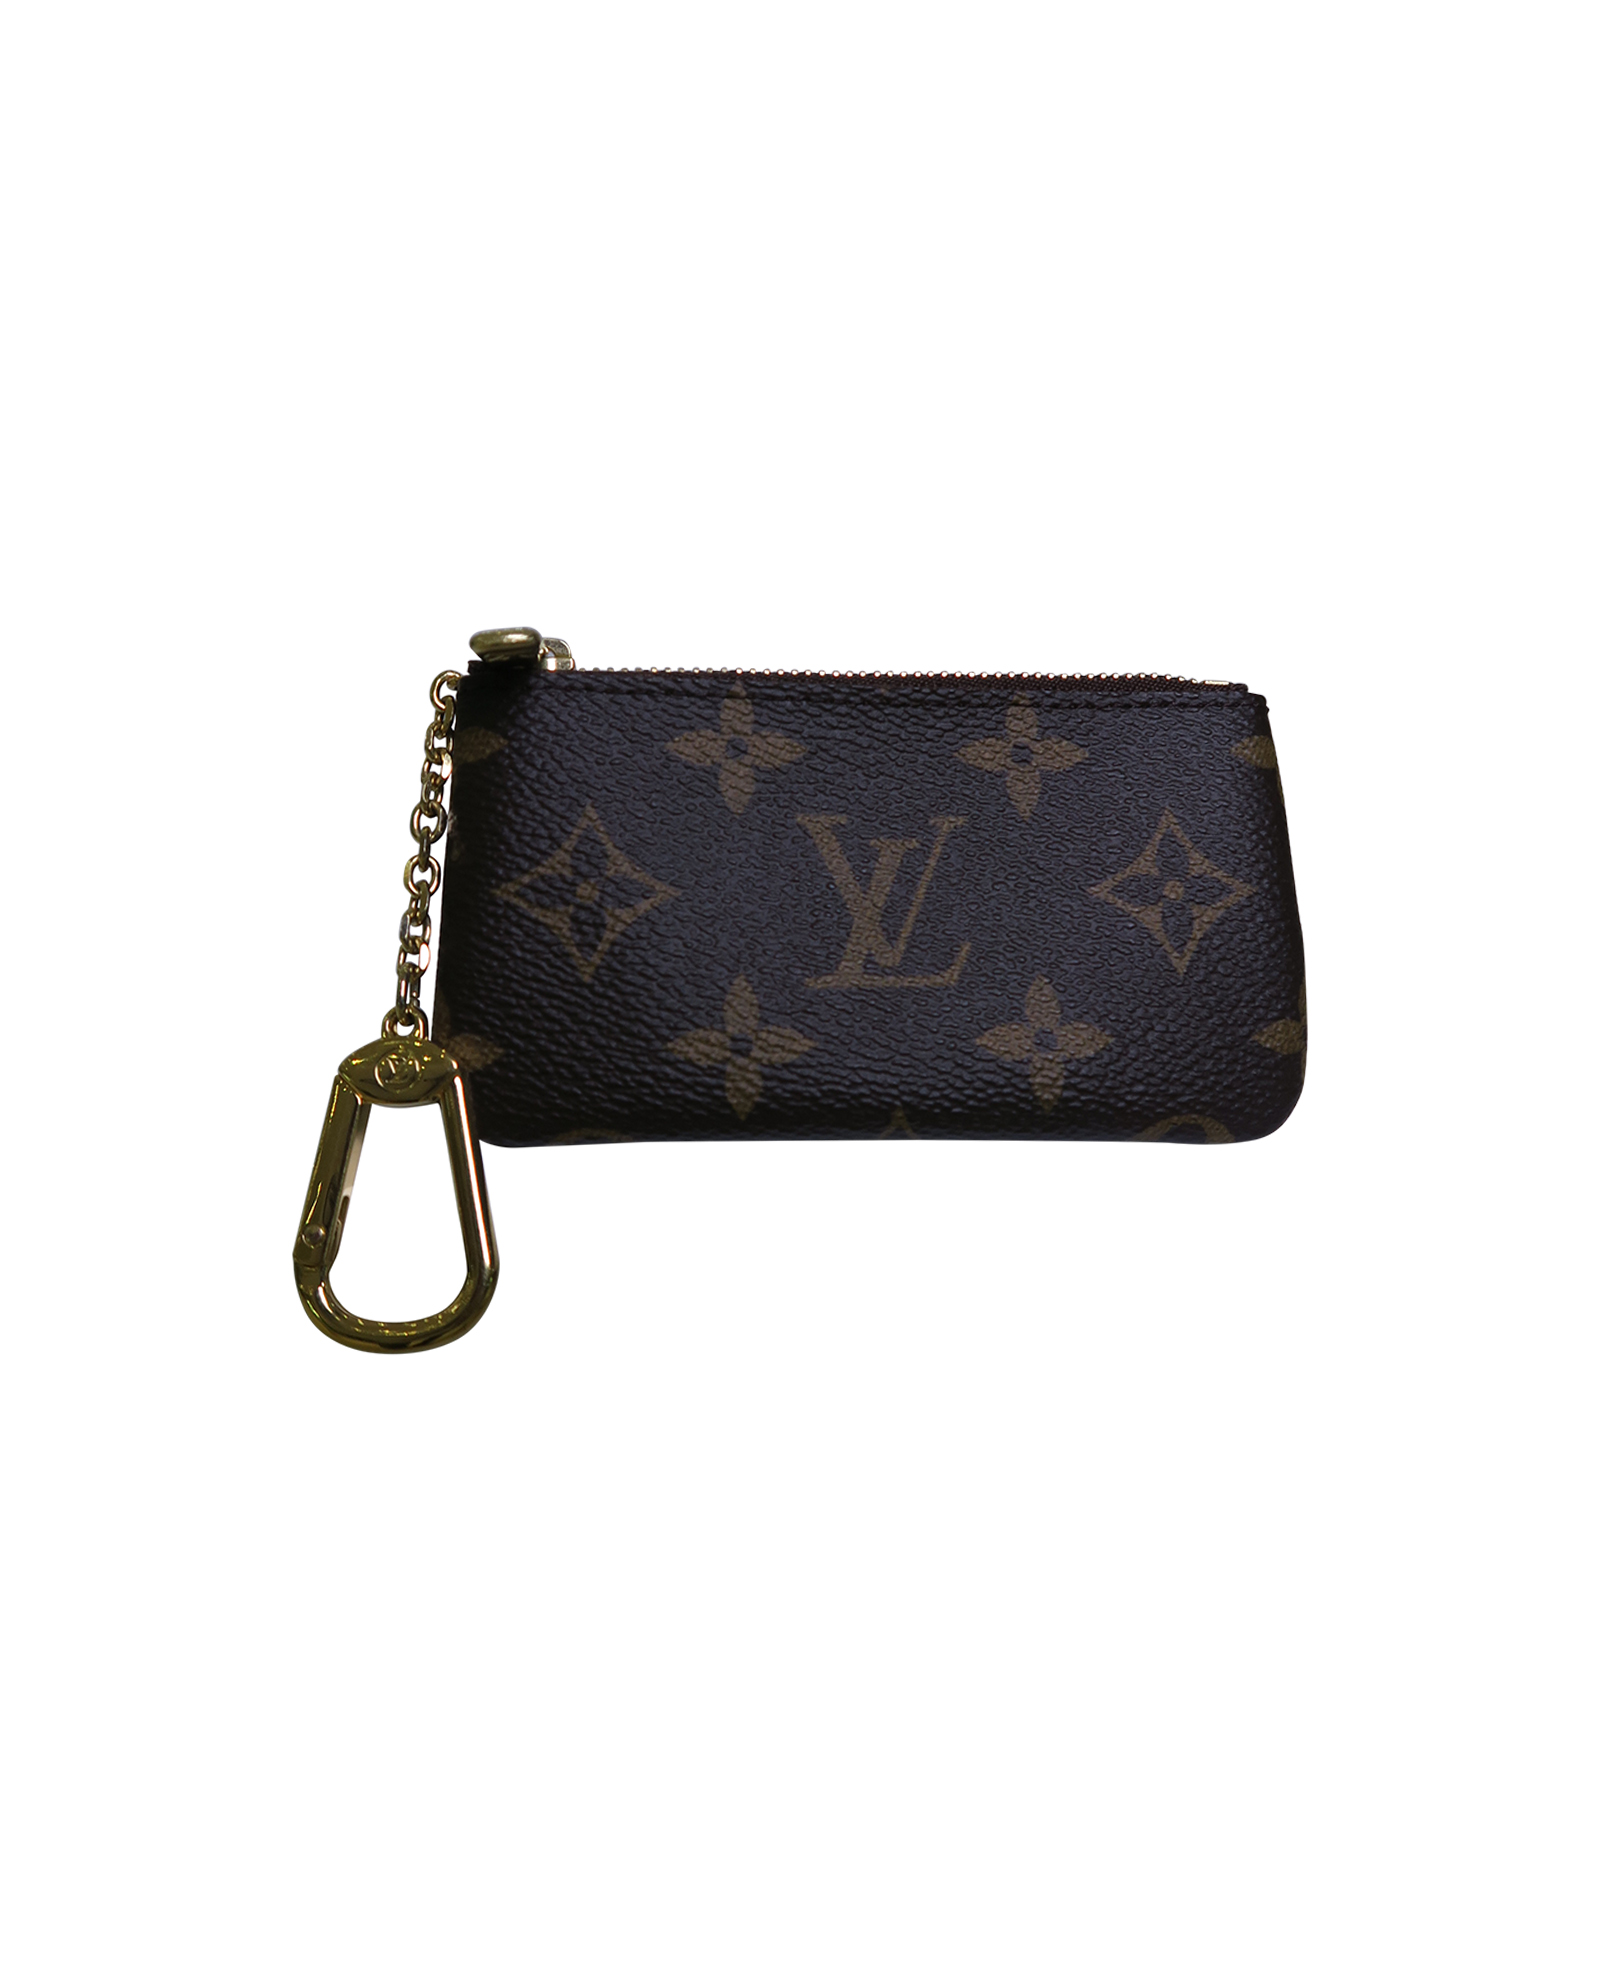 Louis Vuitton Key Pouch, Small Leather Goods - Designer Exchange